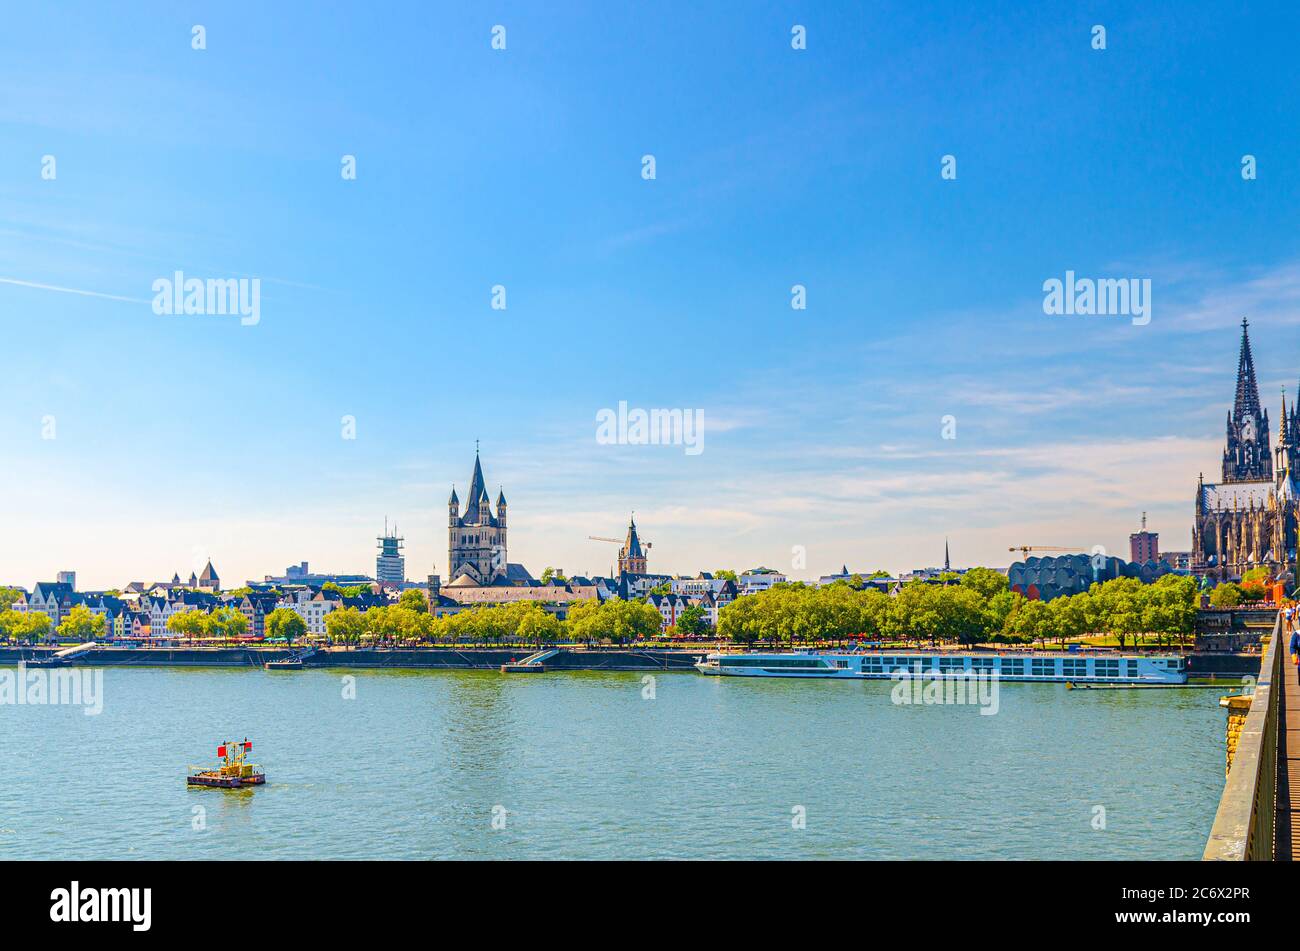 Cologne cityscape of historical city centre with Cologne Cathedral of Saint Peter, Great Saint Martin Roman Catholic Church buildings and embankment of Rhine river, North Rhine-Westphalia, Germany Stock Photo